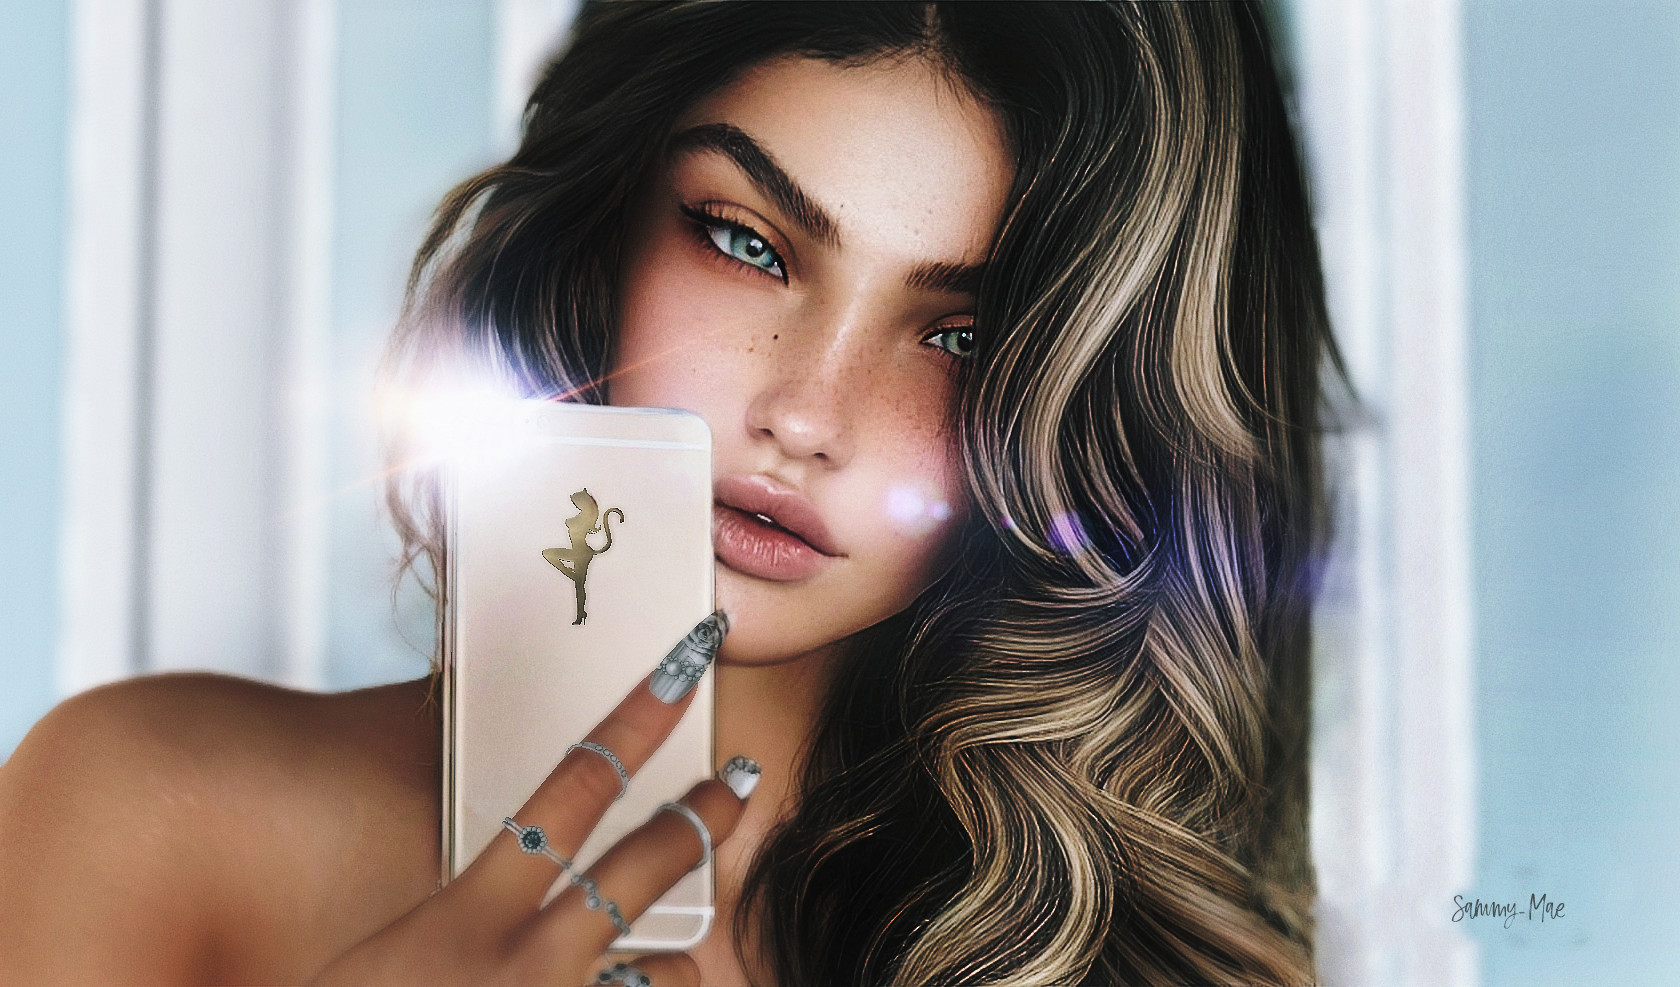 Capturing Virtual Beauty: The Realistic Deep Portraits of Second Life Photographer Sammy